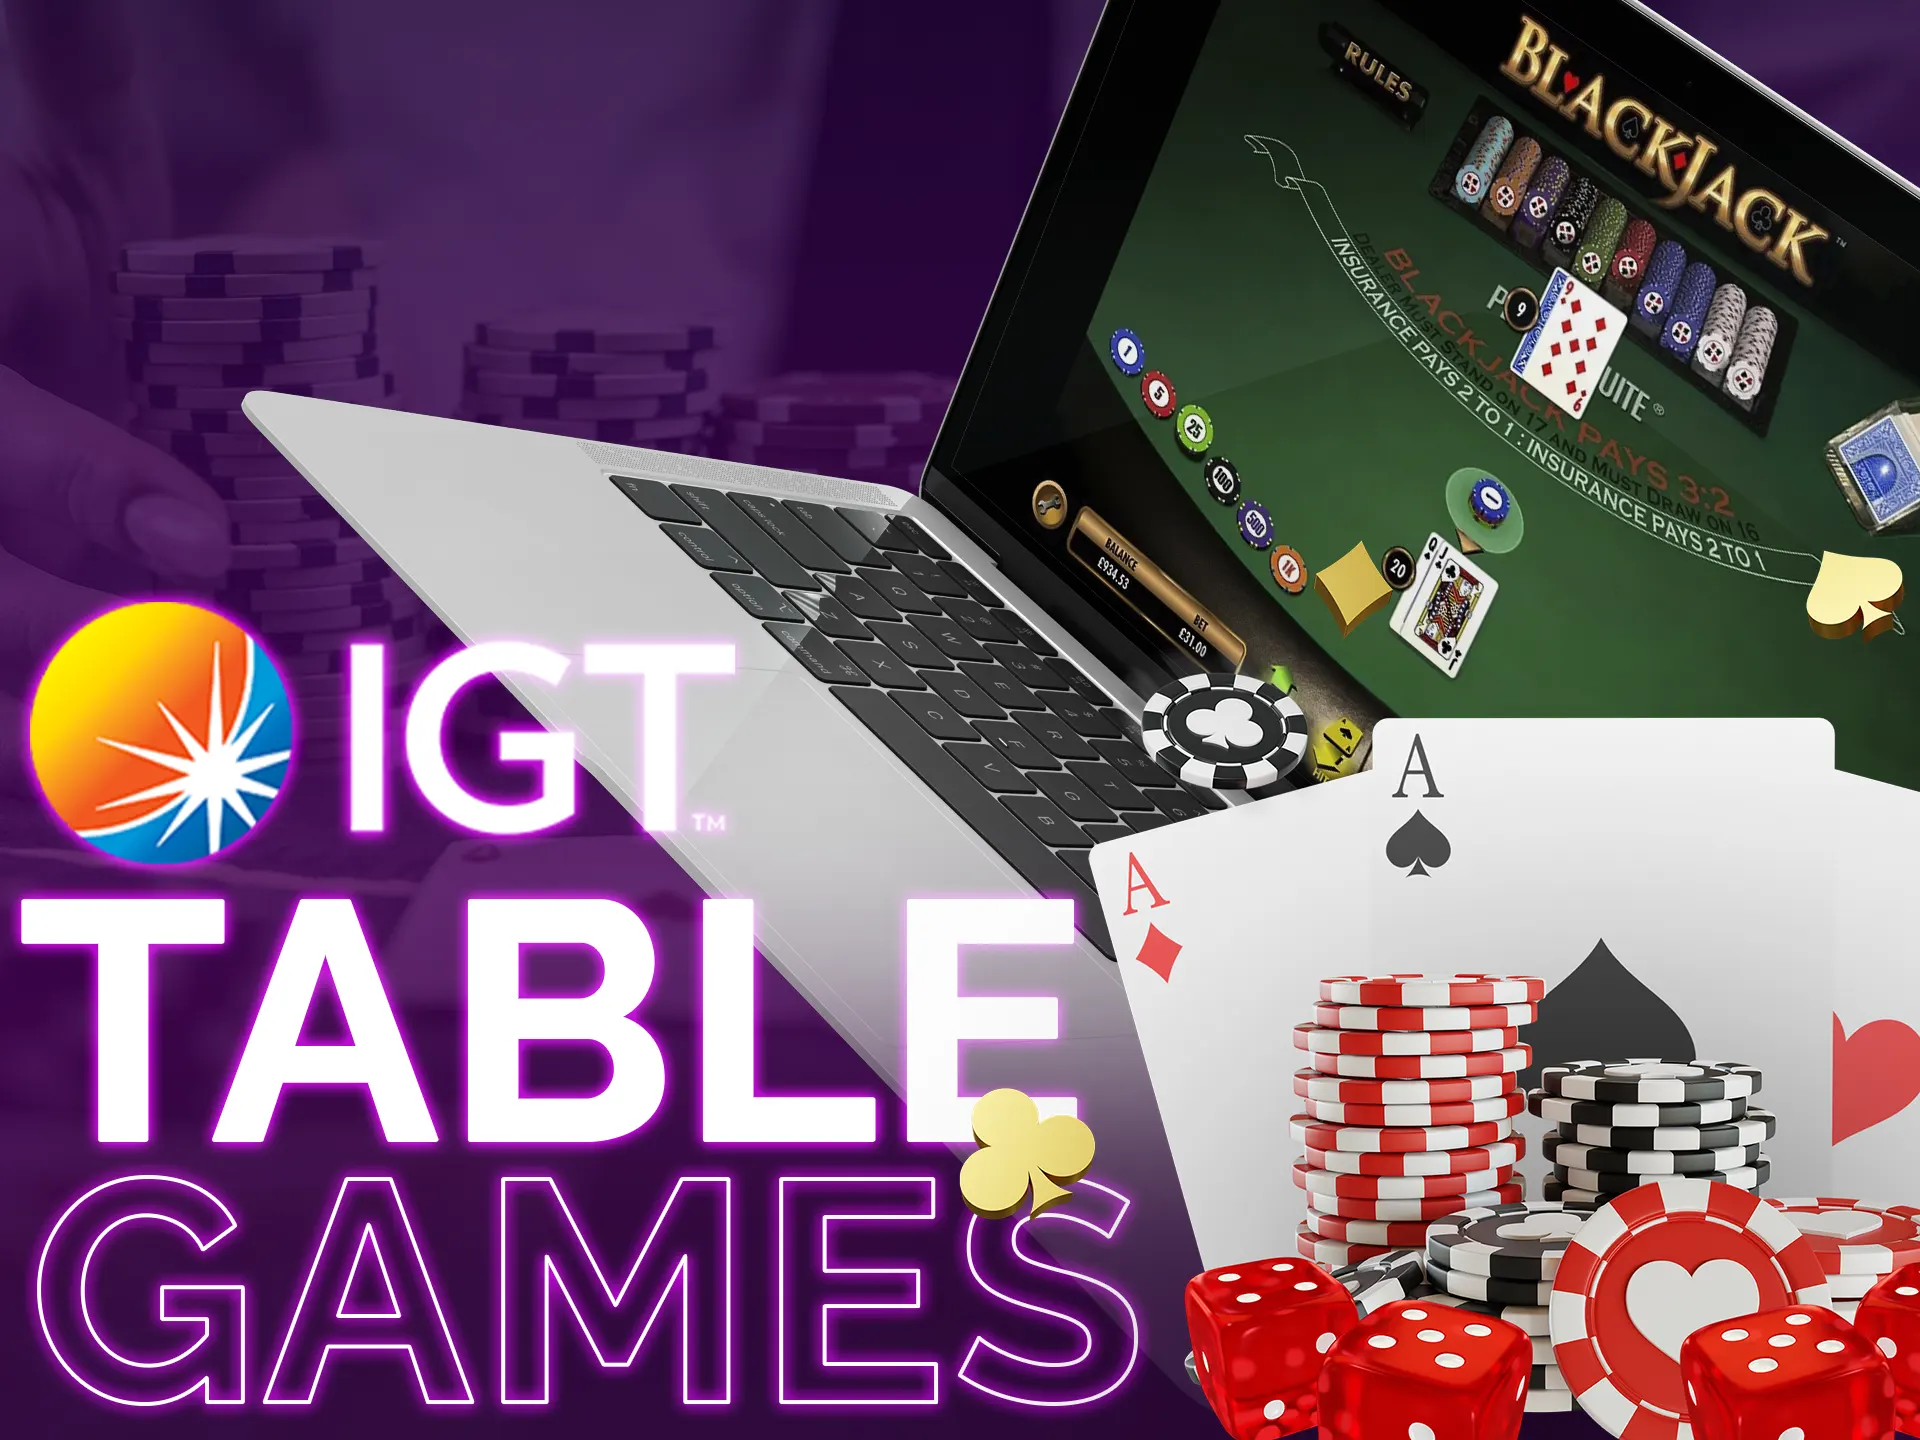 IGT has a variety in table games, including roulette and blackjack.